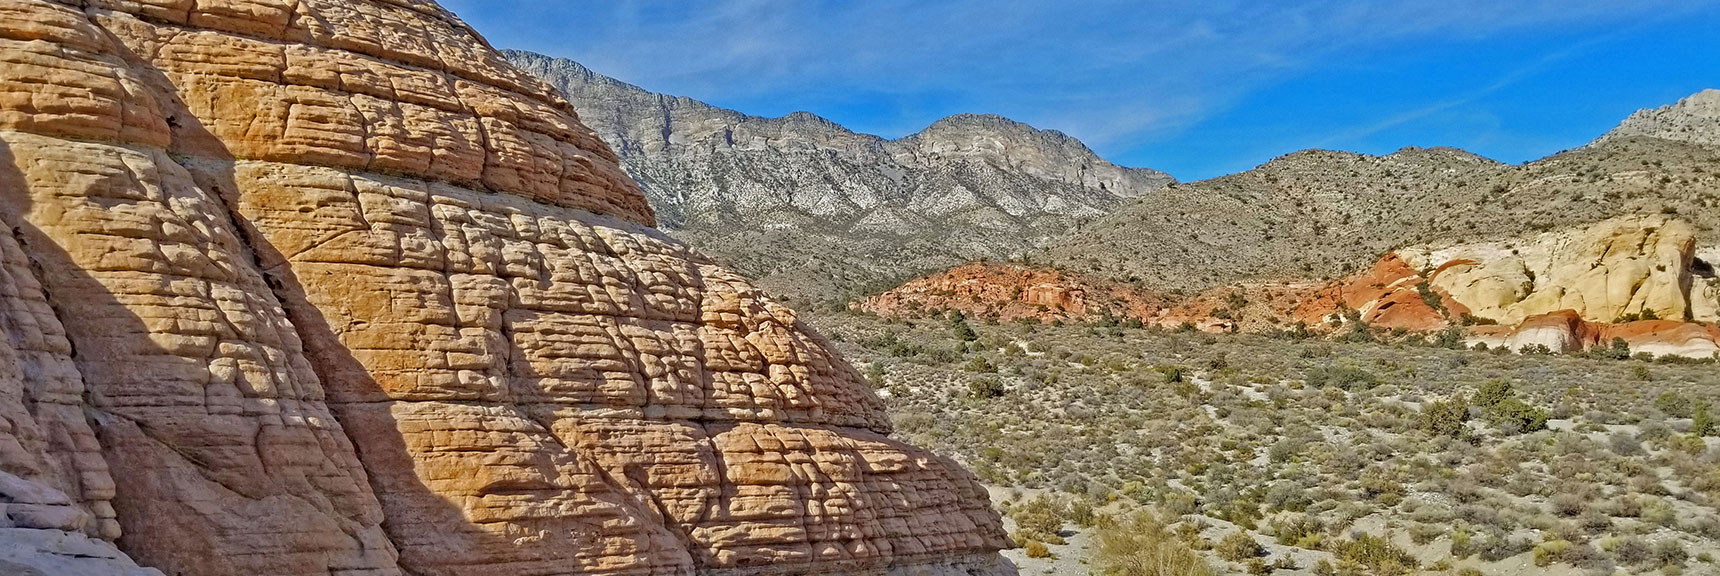 One of the Jurassic Frozen Cliffs to Avoid Near the Base of Brownstone Basin | Kraft Mountain, Gateway Canyon Loop, Calico Basin, Nevada